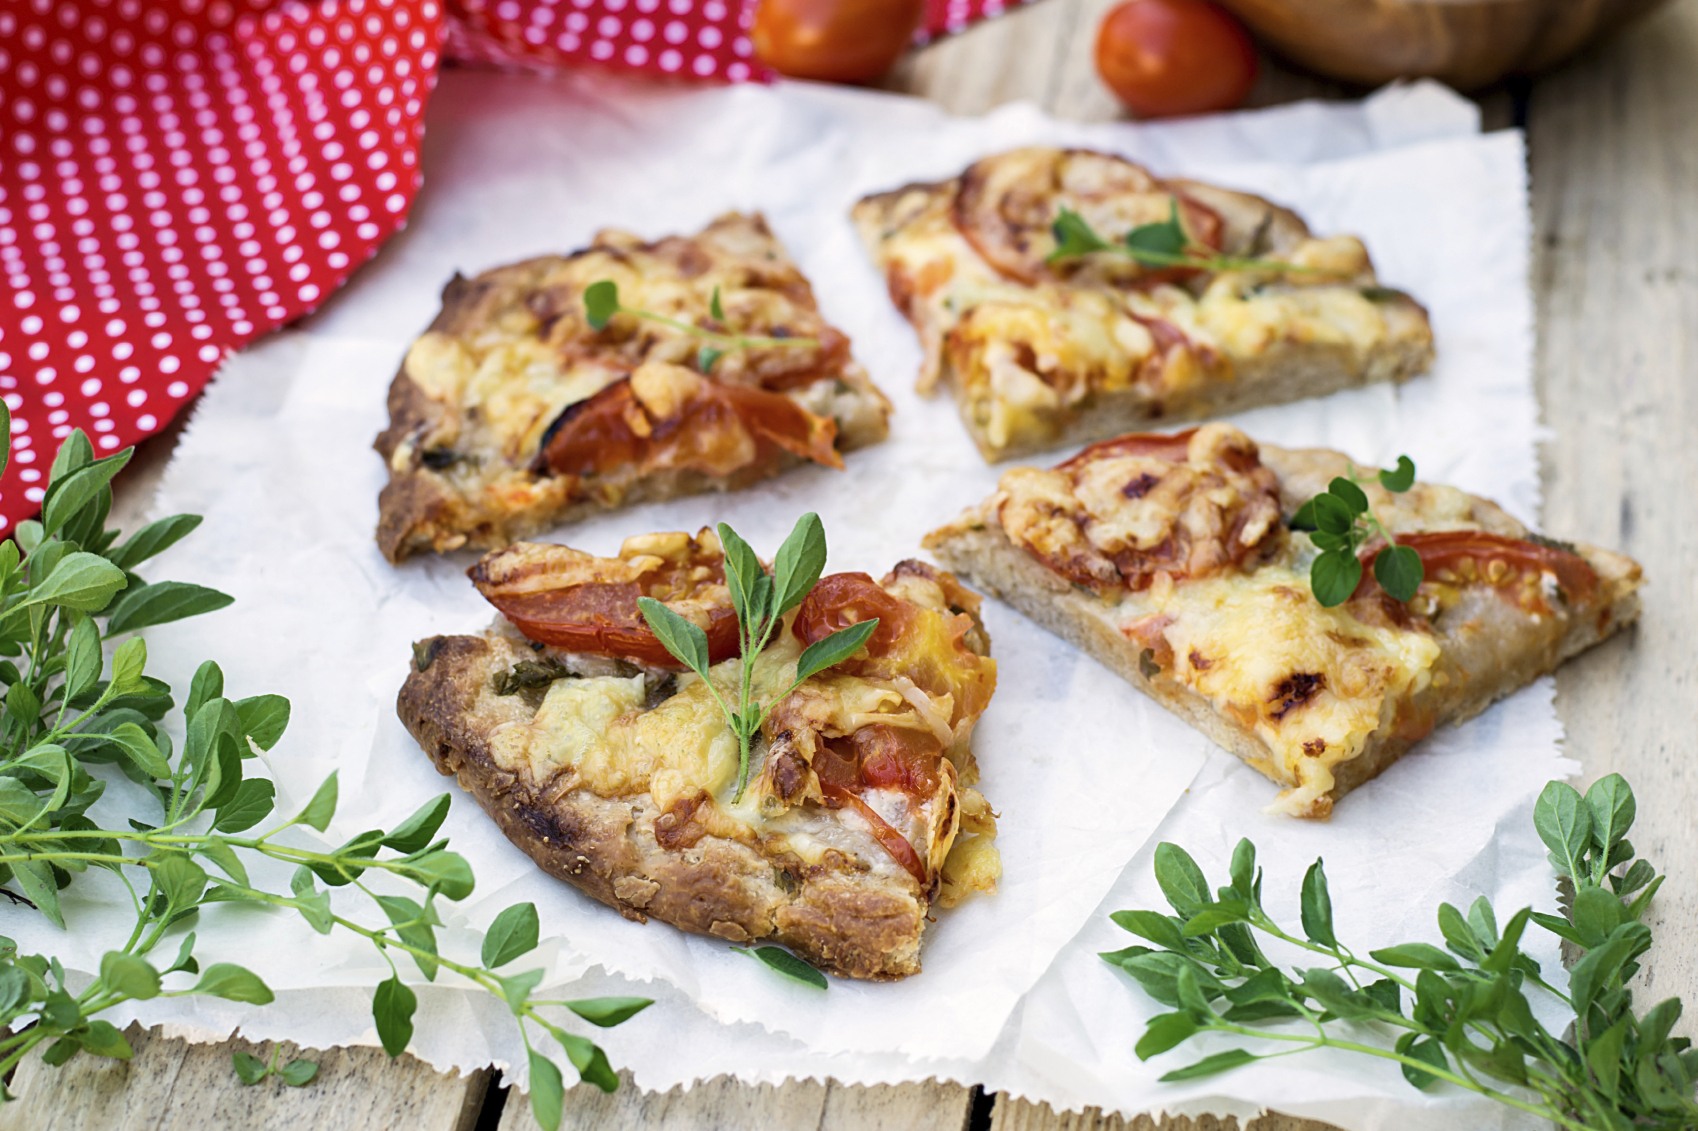 Wholewheat wholemeal pizza with tomatoes, cheese and herbs